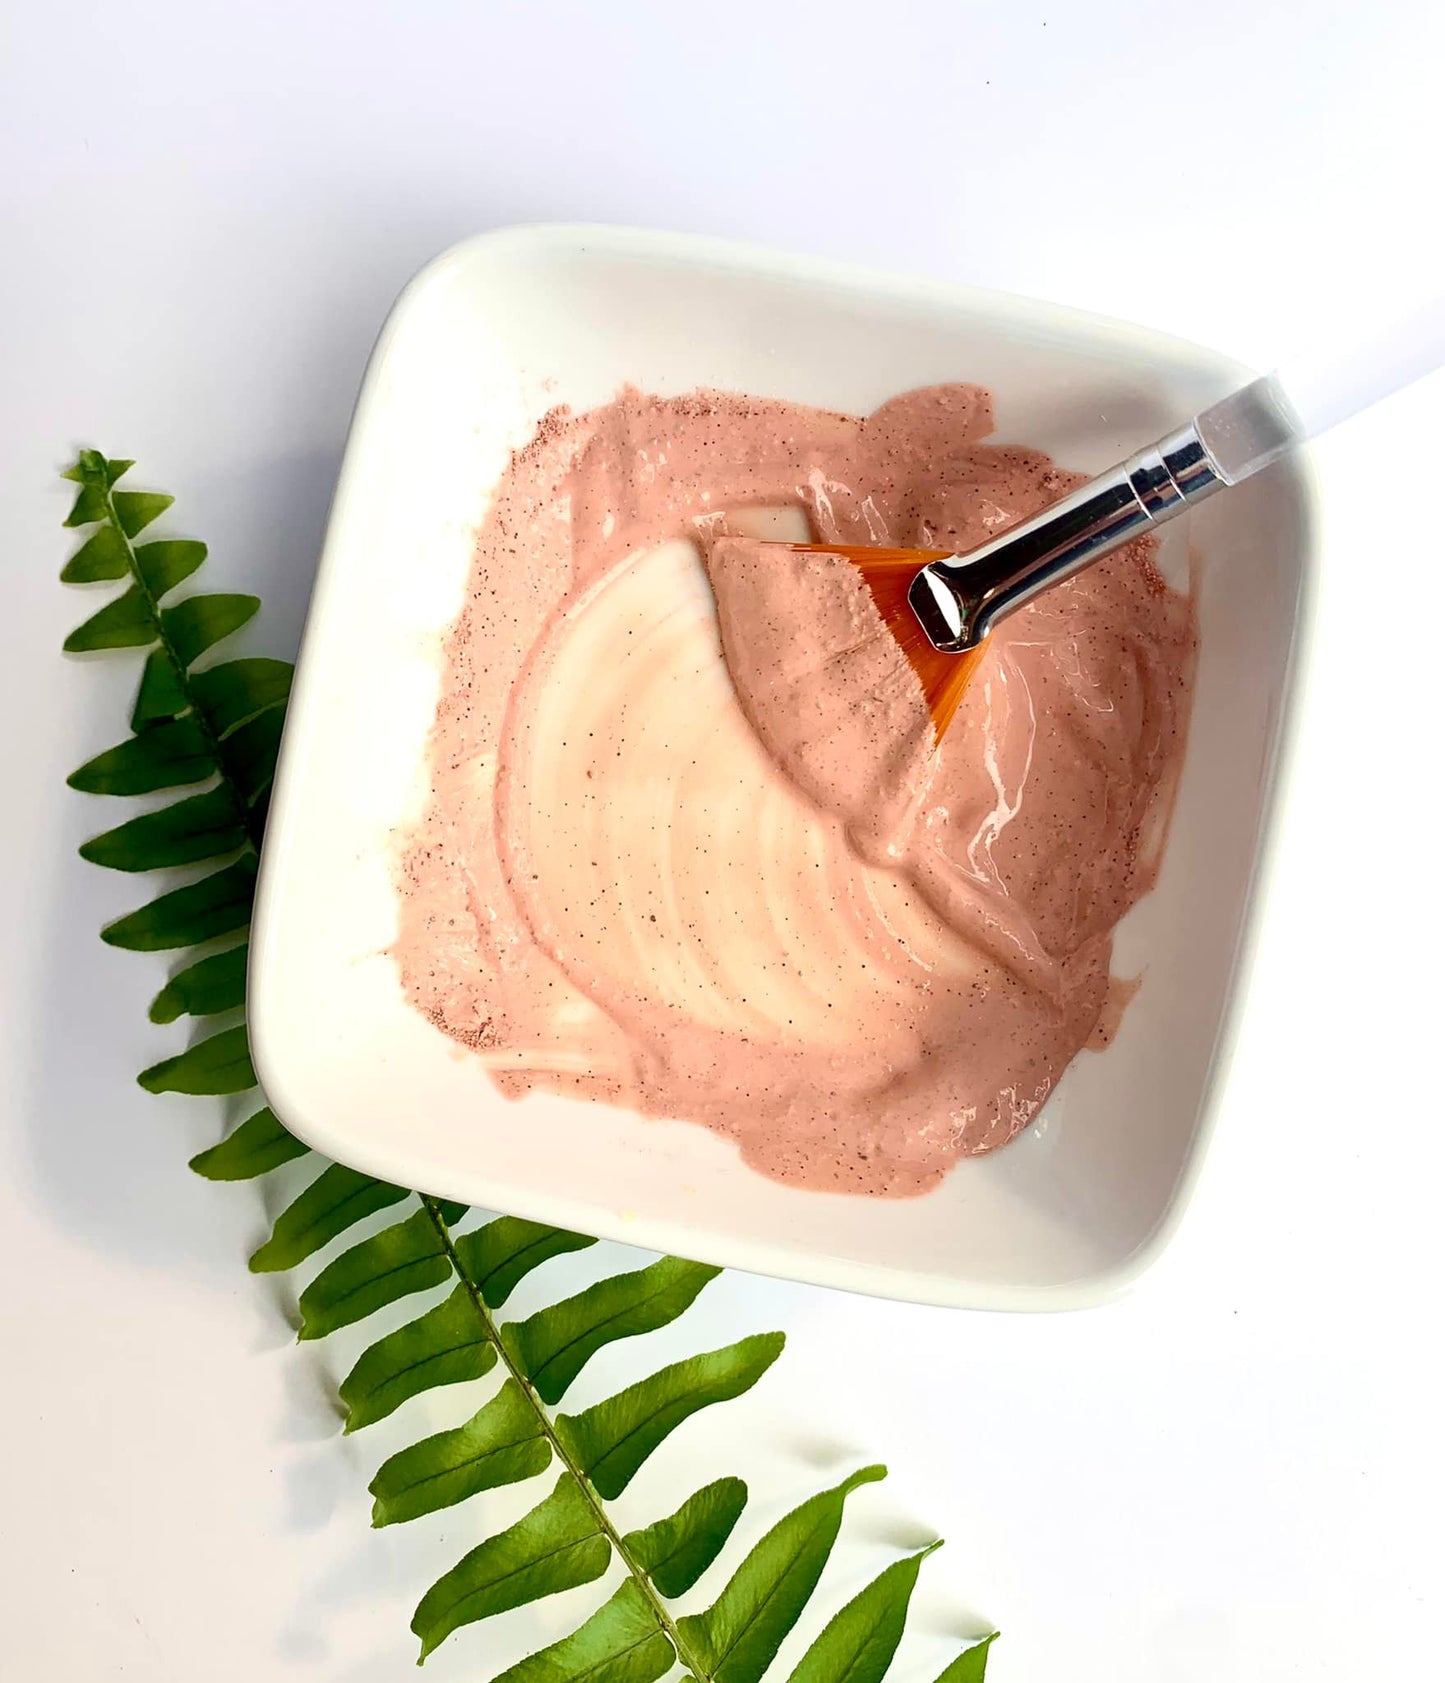 French Pink Clay & Coconut Face Mask